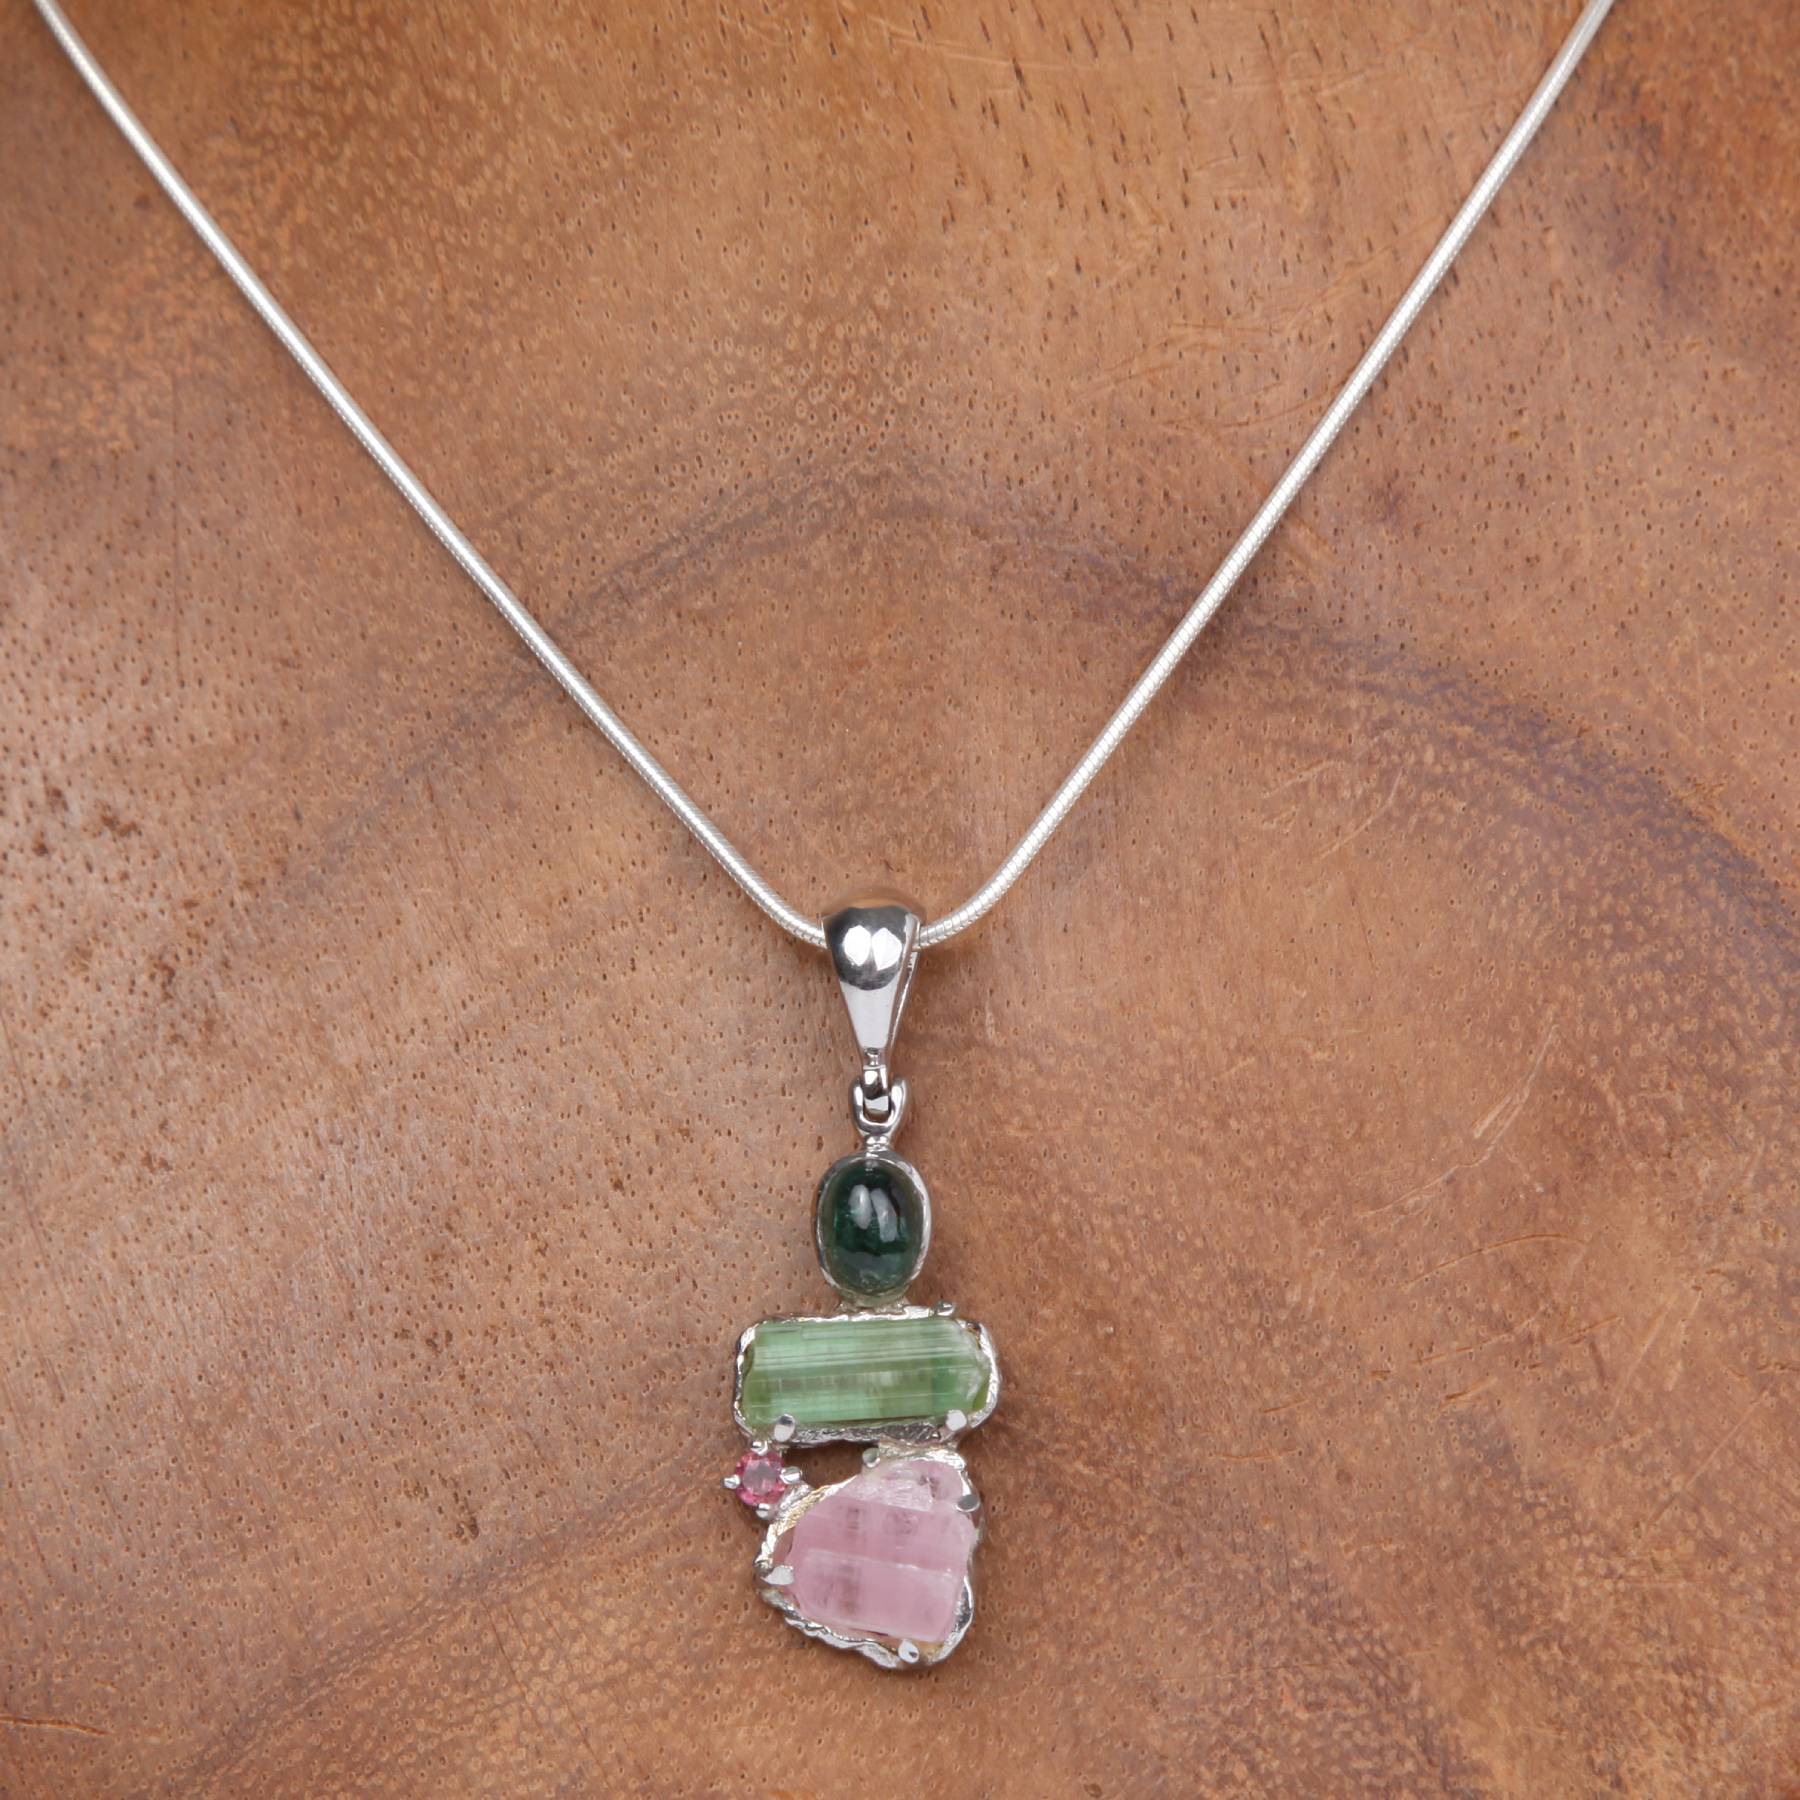 Sterling Silver Pendant with Rough Tourmaline (Pink, Green), Blue Tourmaline Cabochon and Pink Tourmaline (faceted)